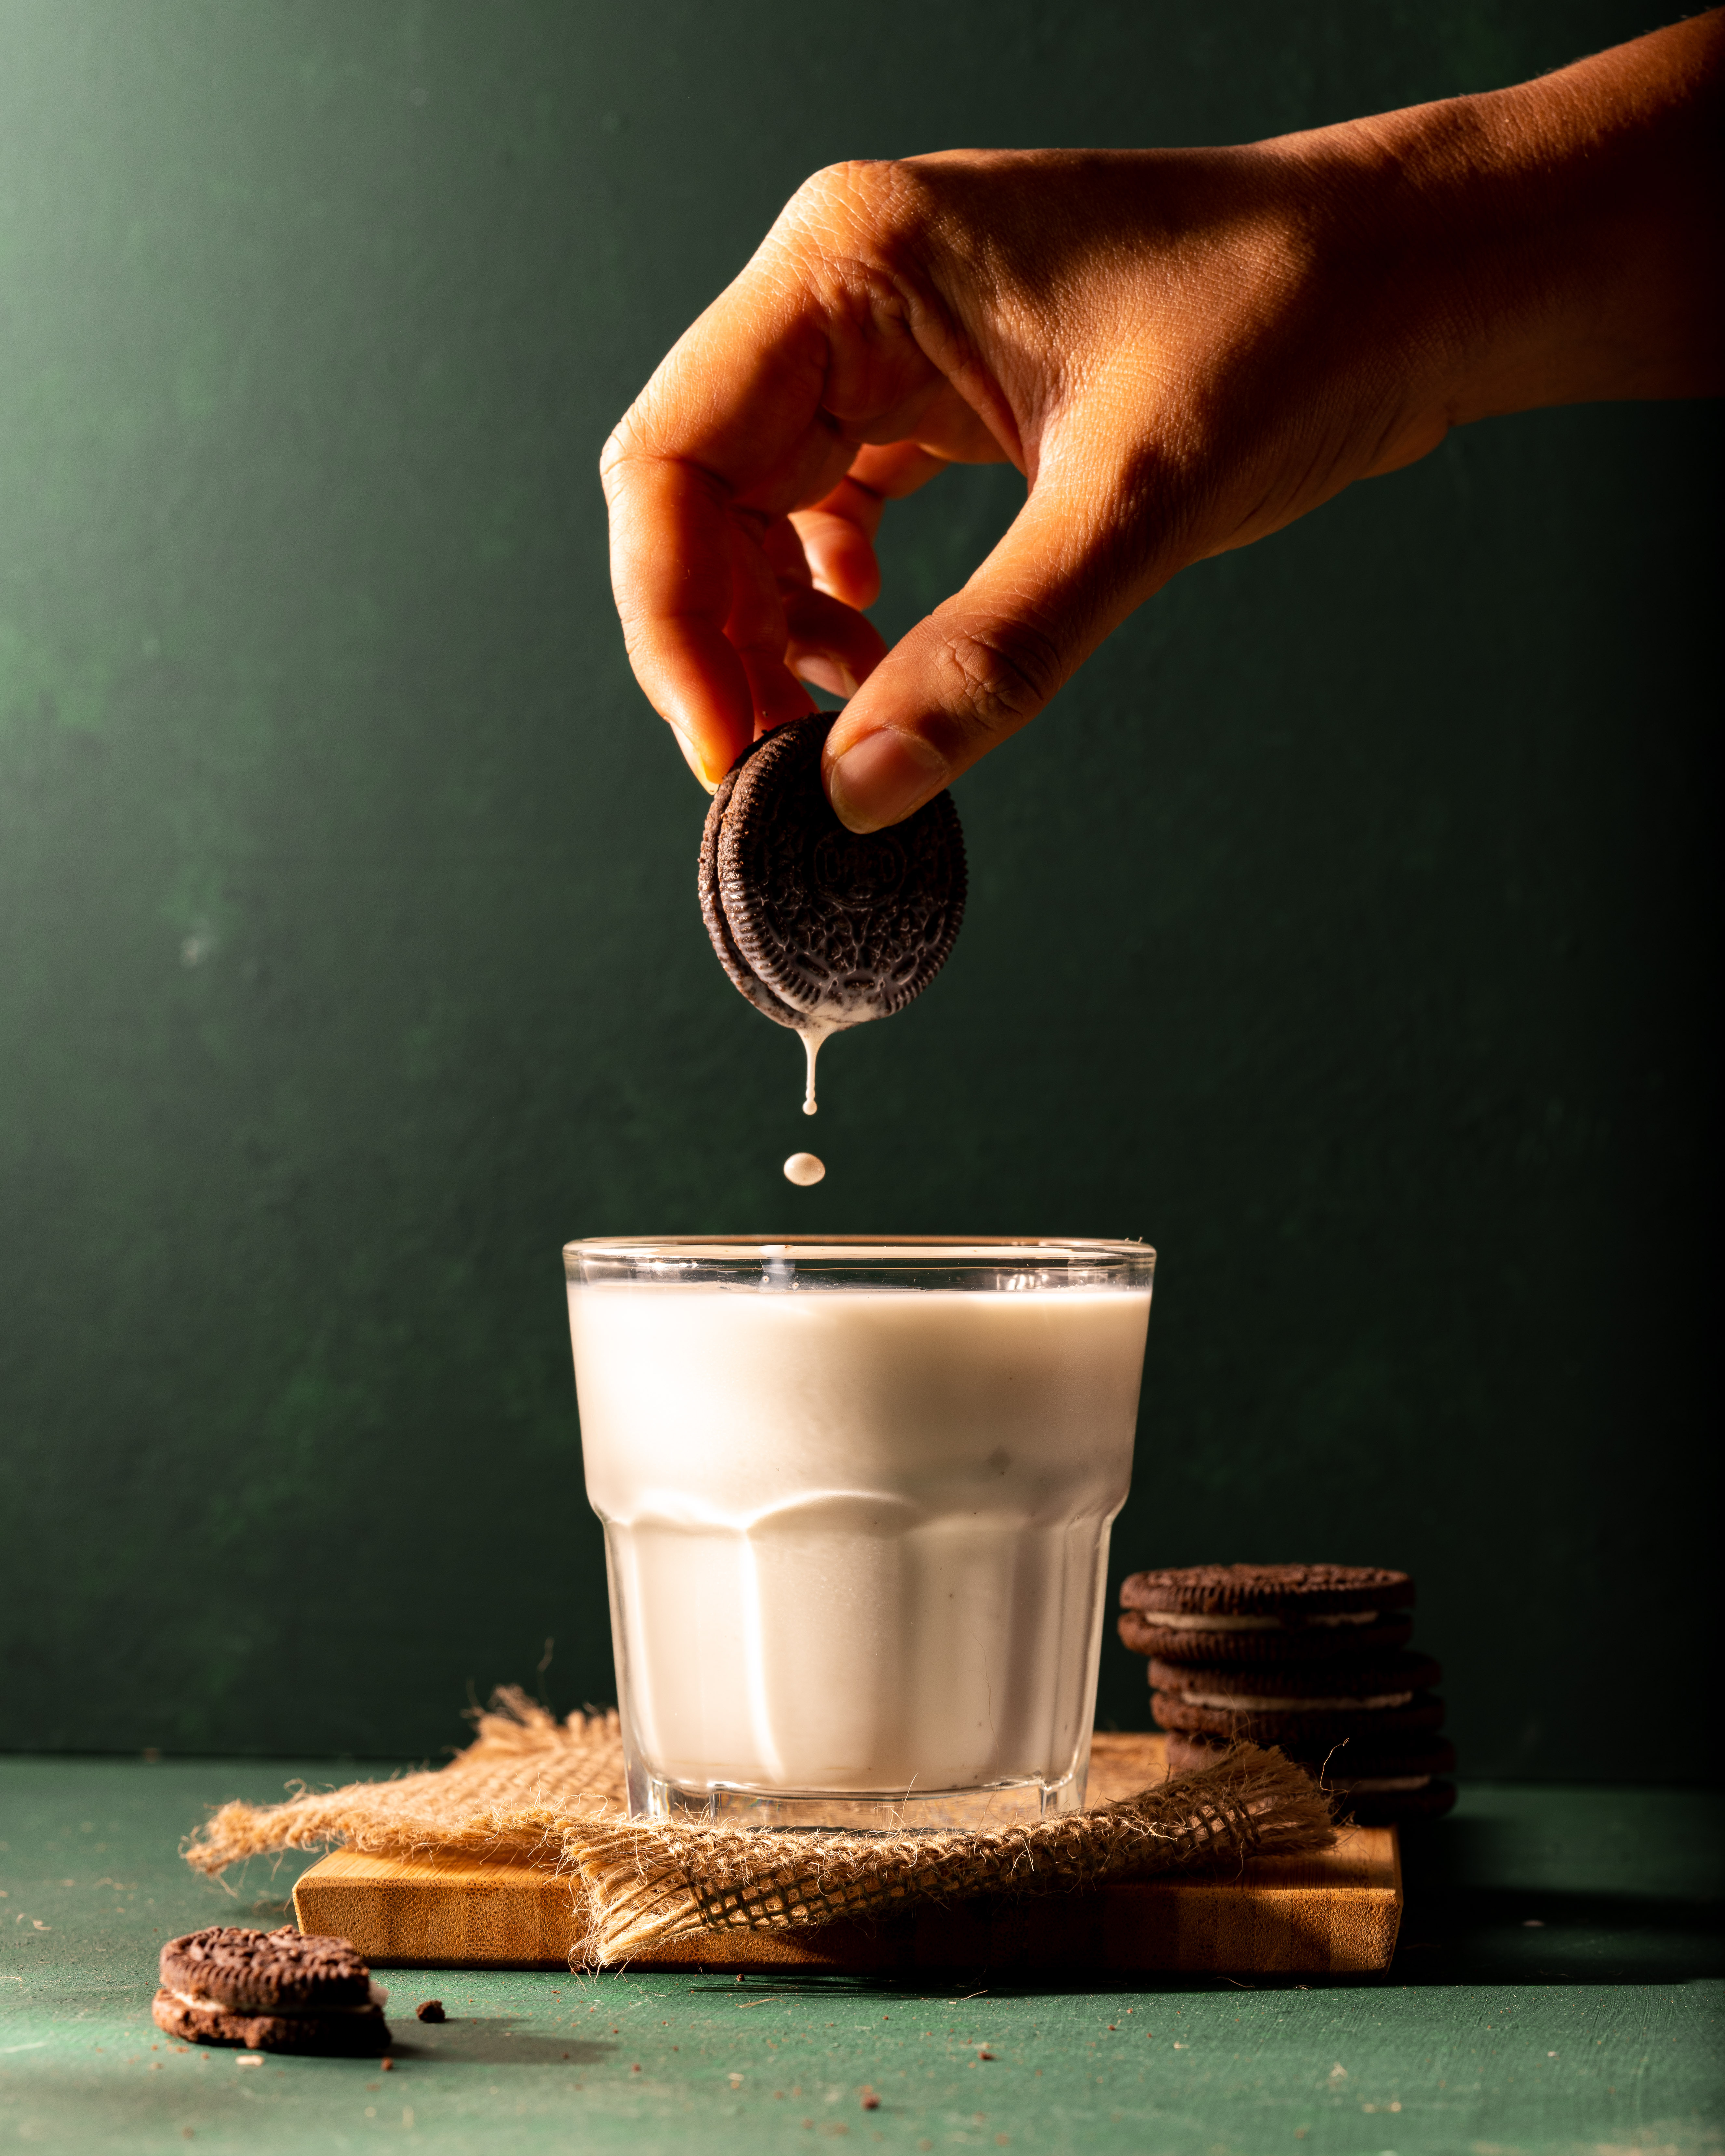 An Oreo biscuit being dipped in a glass of milk. Just like what happened in the Oreo Dunk challenge!